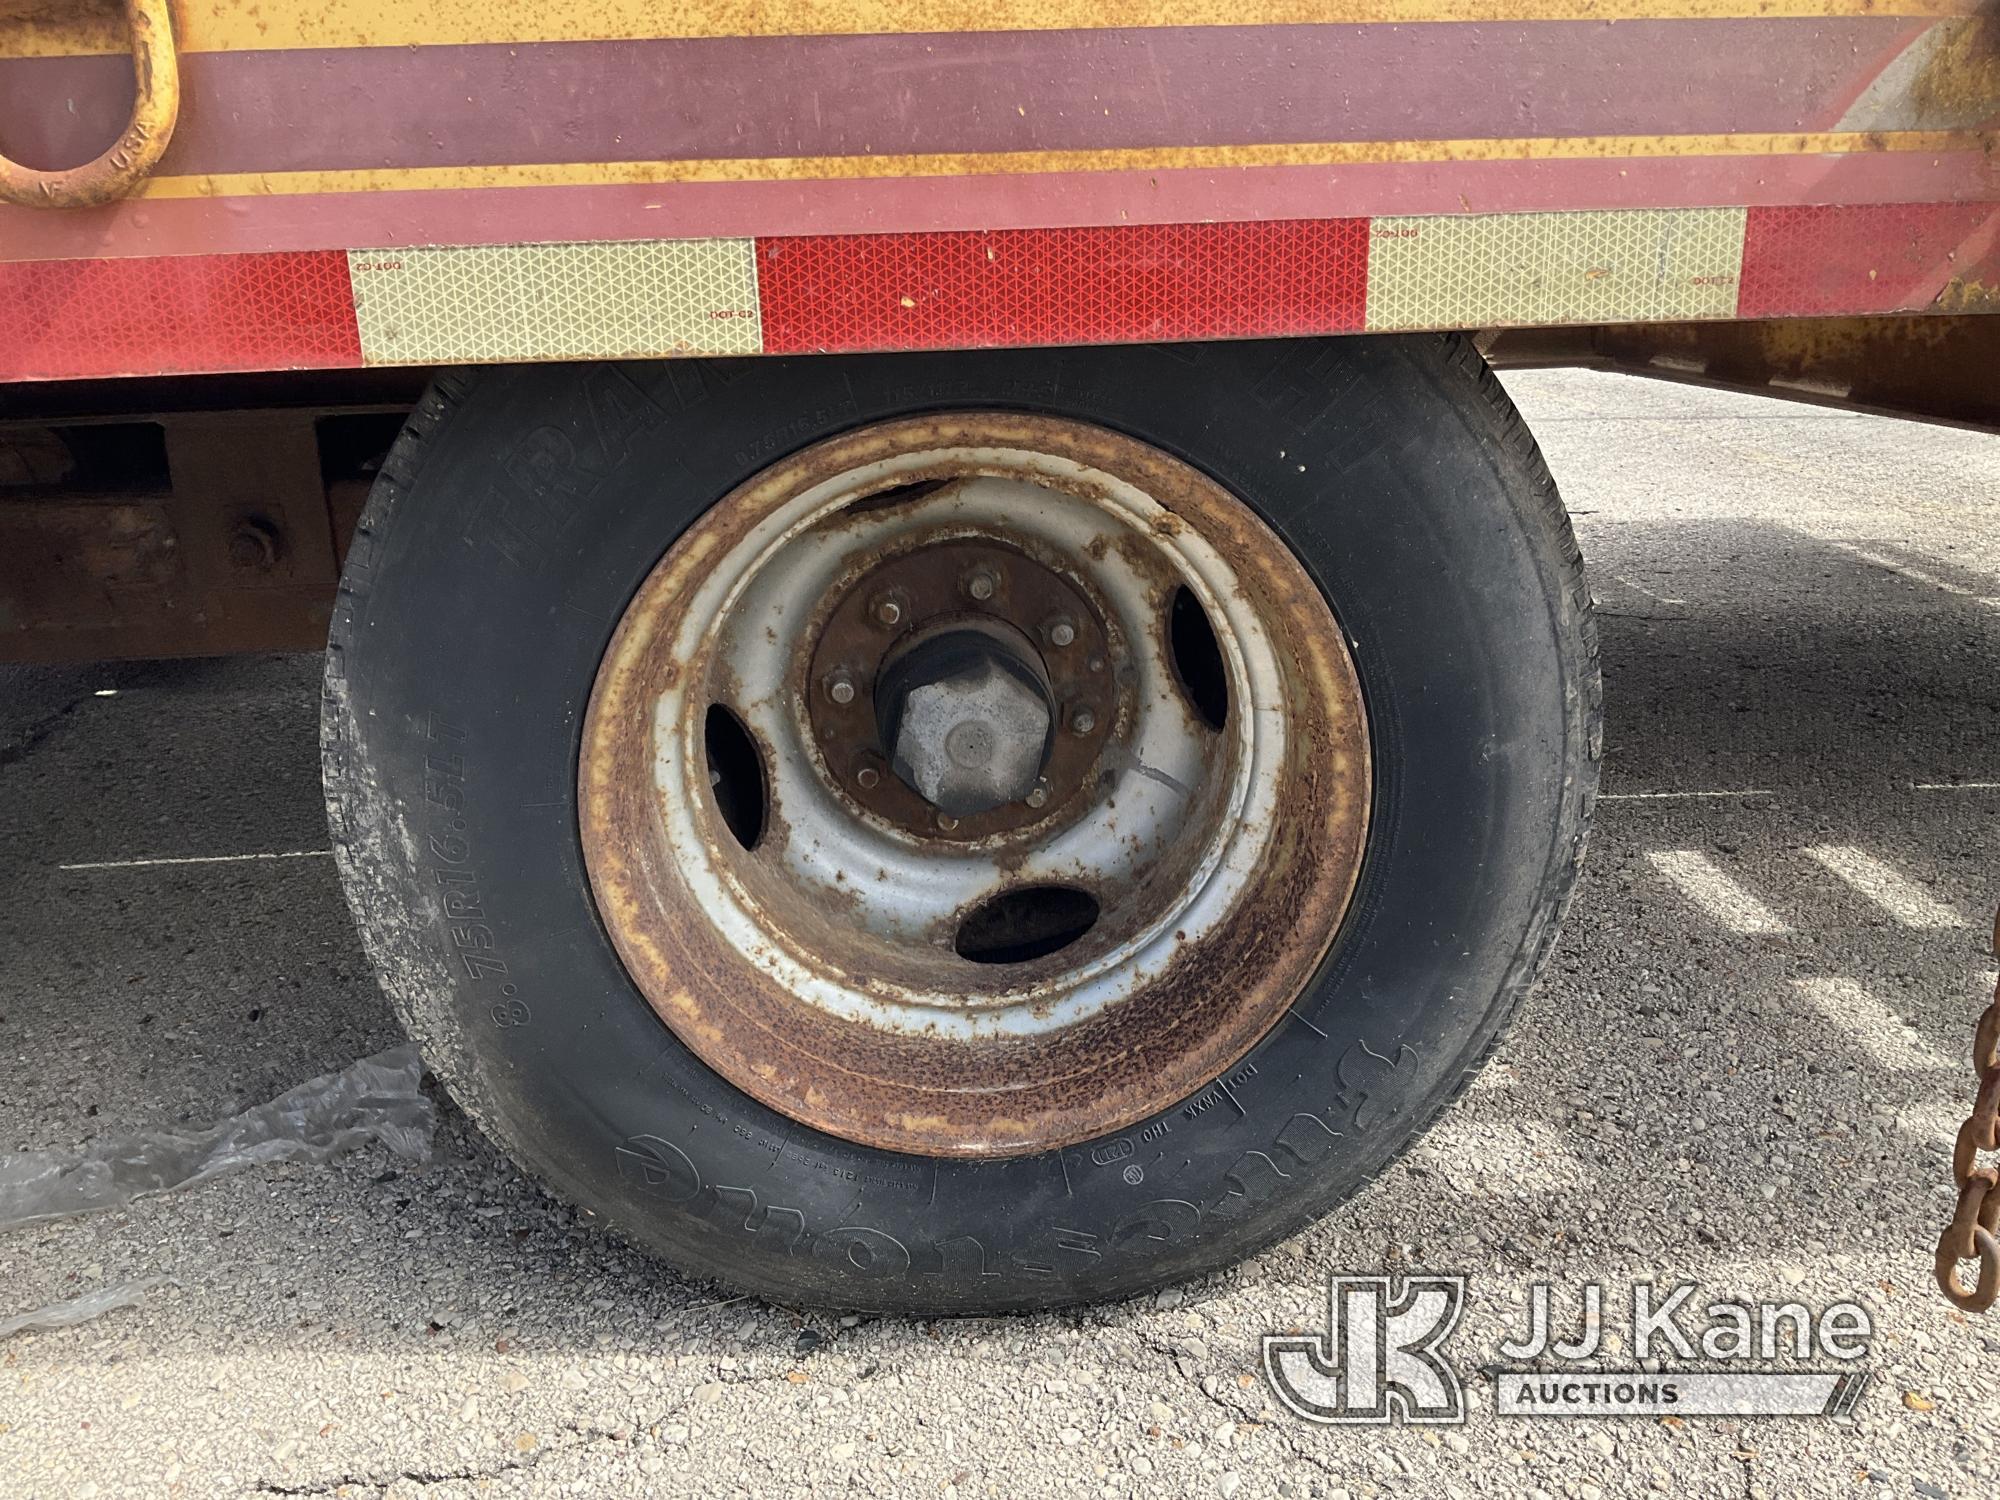 (Sun Prairie, WI) 1992 Eager Beaver 10HDB TRAILER Needs tire (punctured) Deck Is 8FT Wide And 24FT L